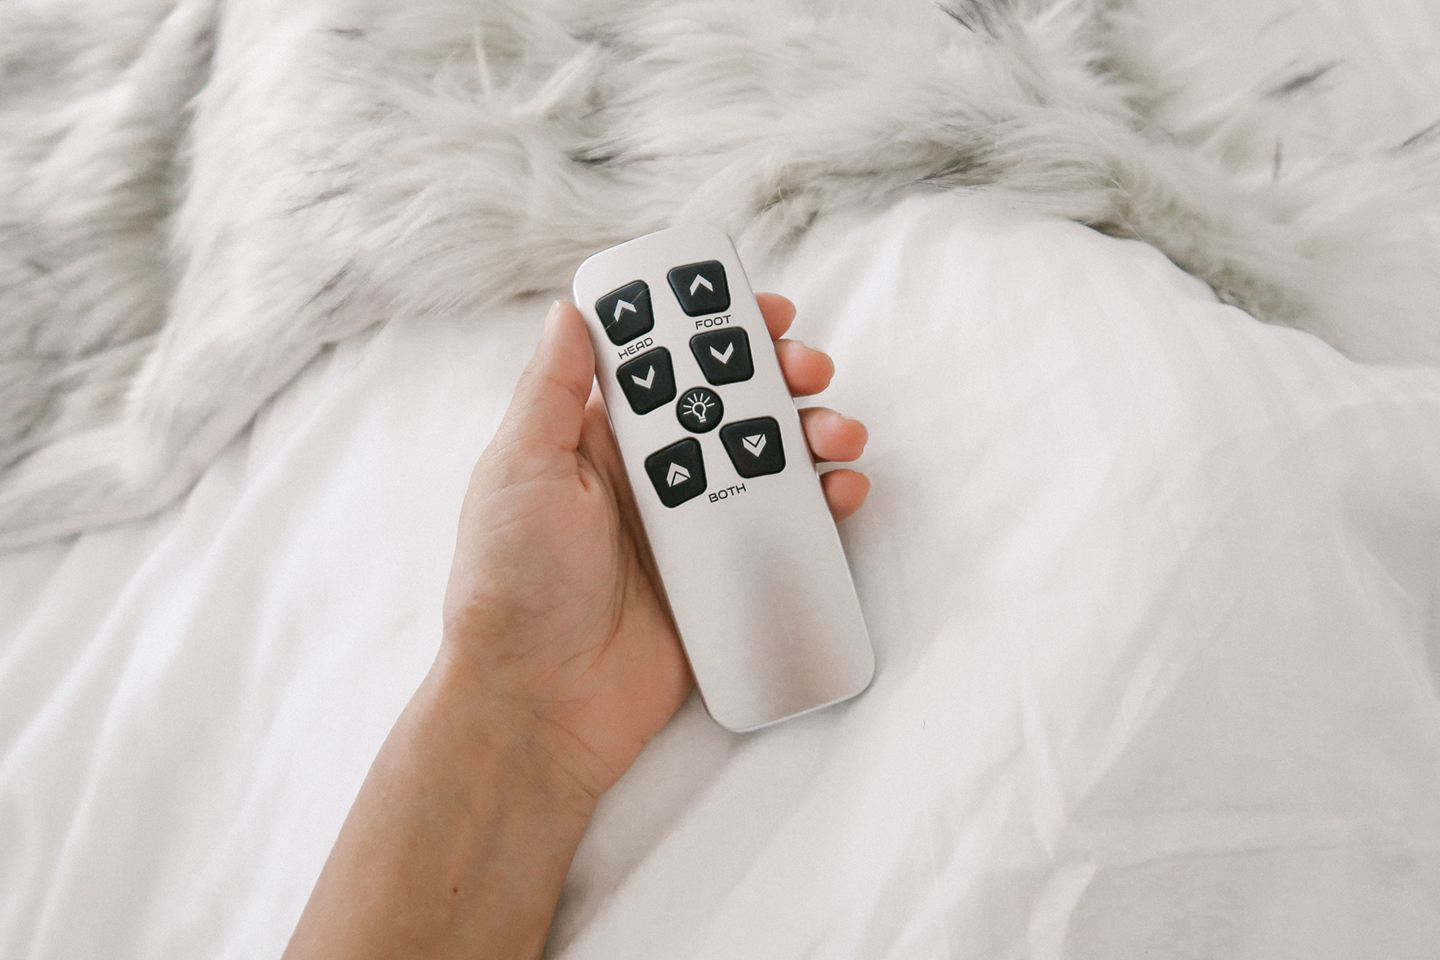 Benefits Of Using The Mattress Firm Remote